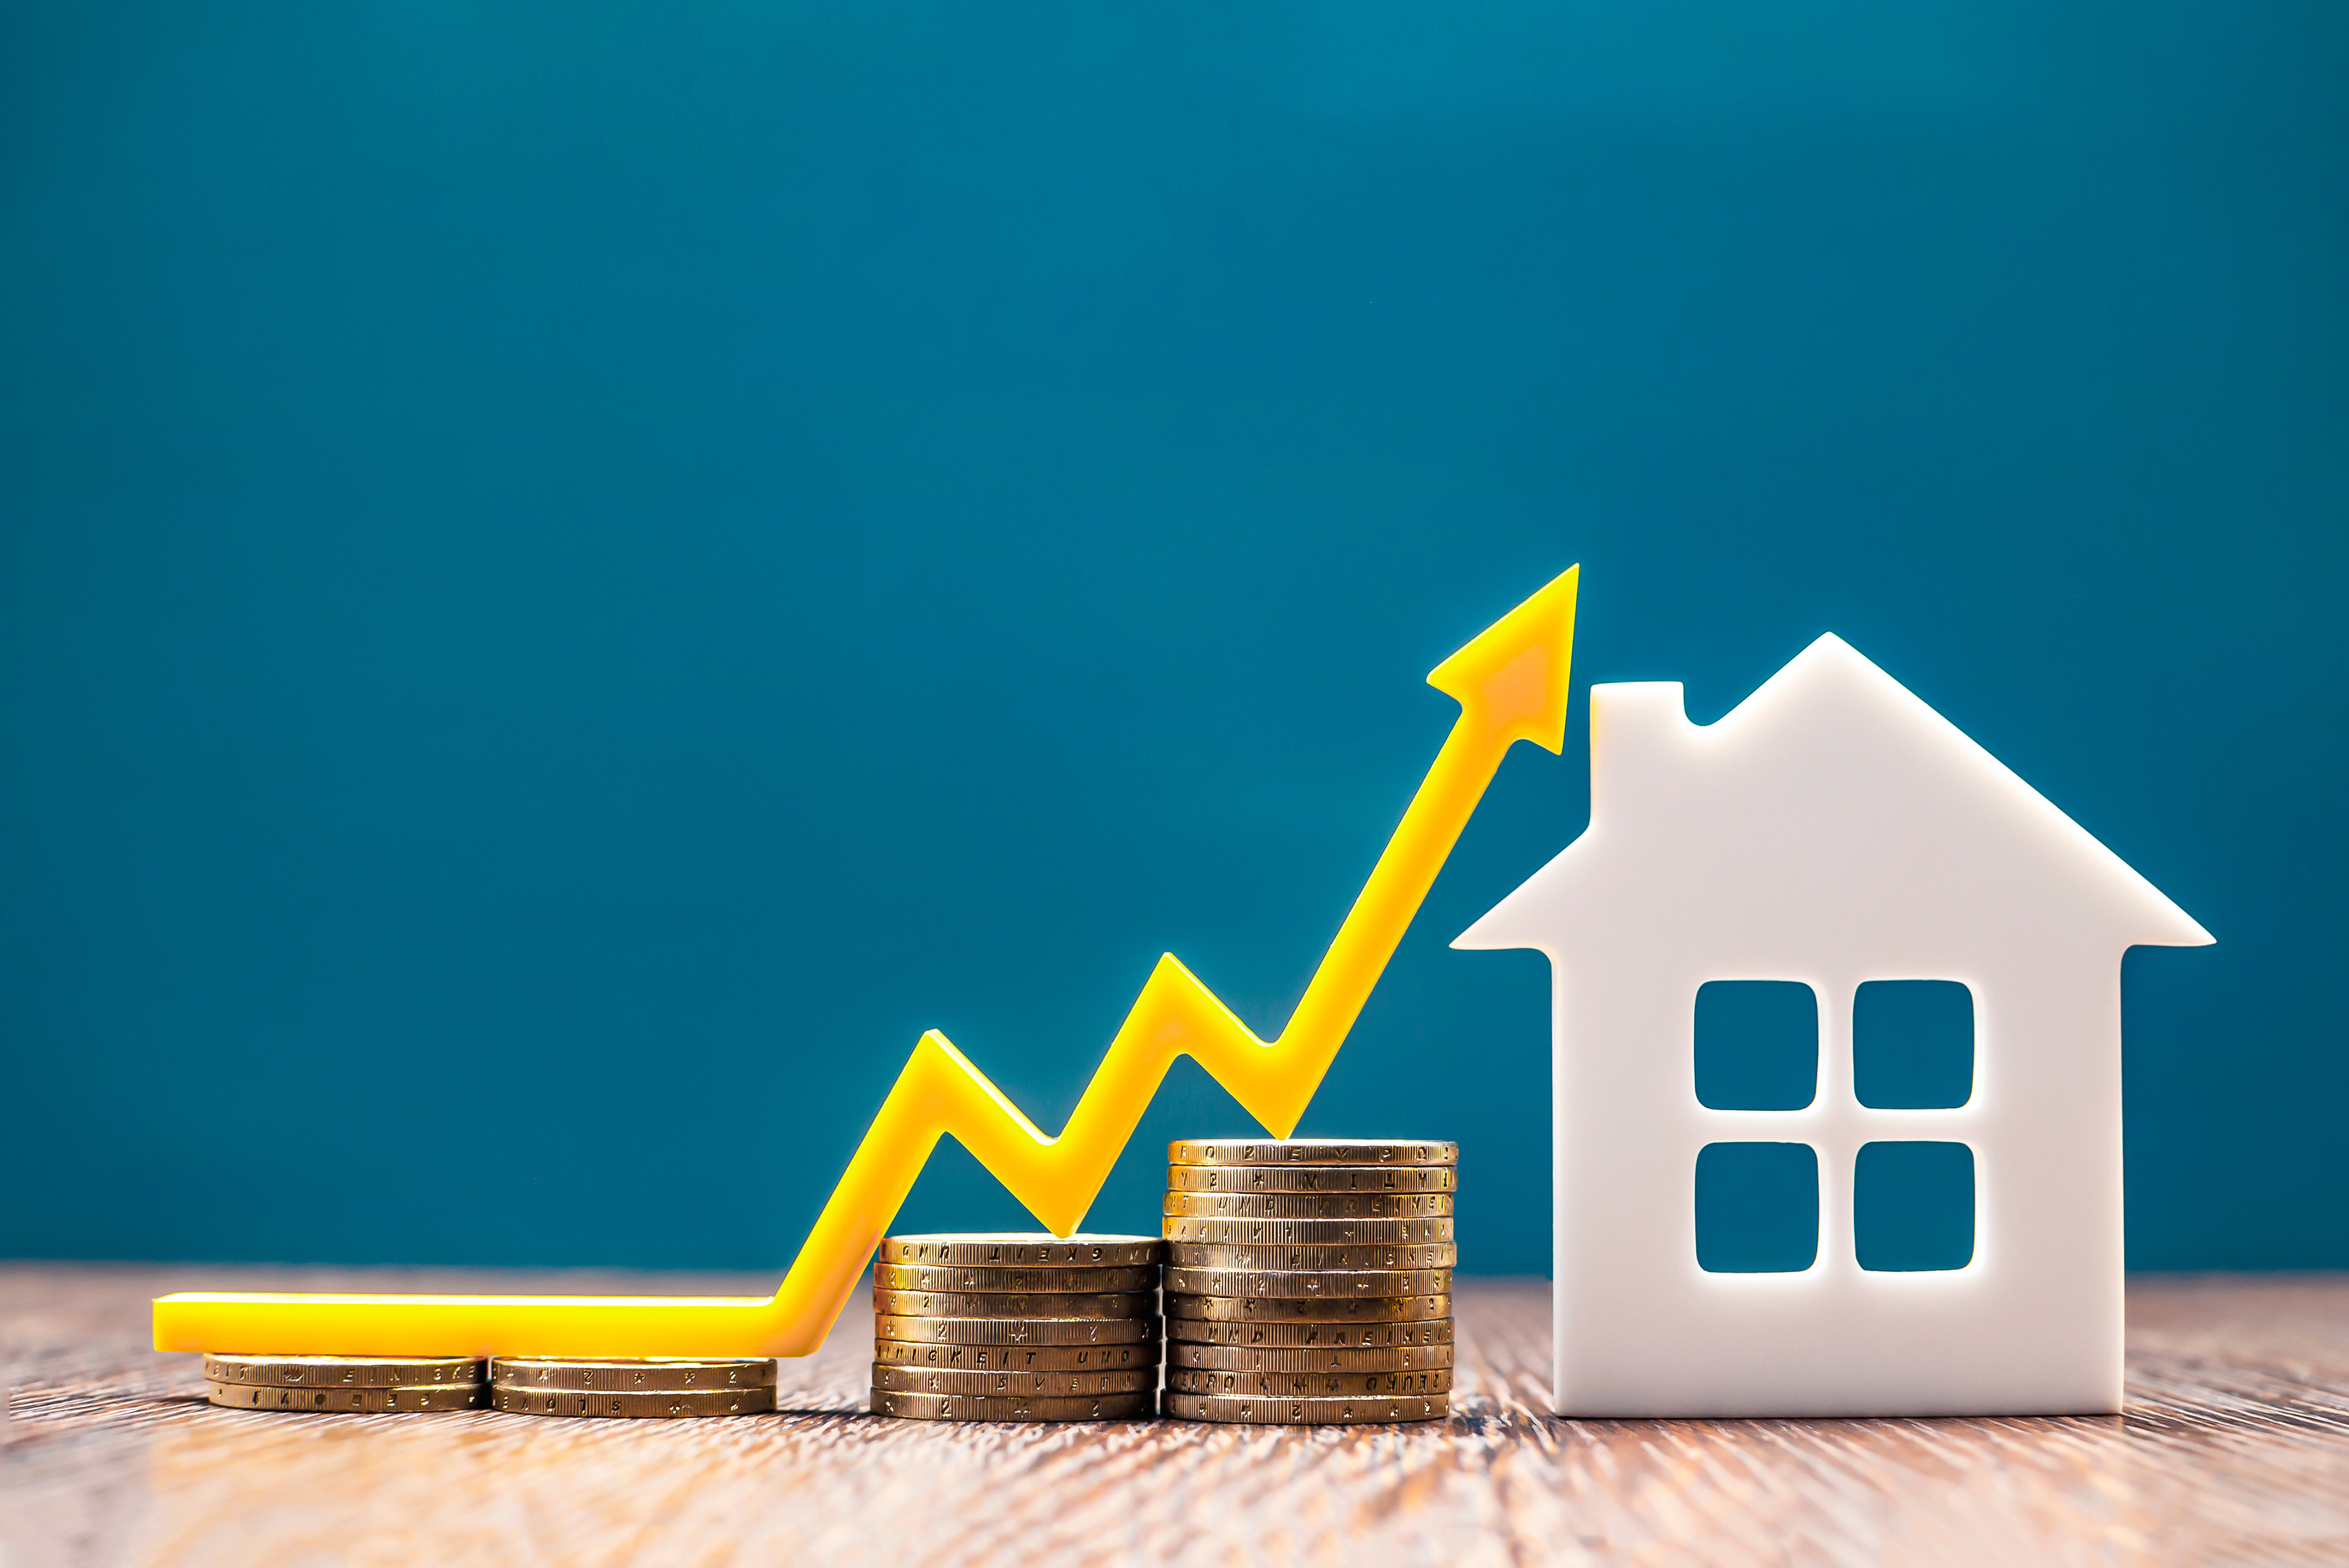 Should You Still Buy a Home with the Latest News About Inflation?